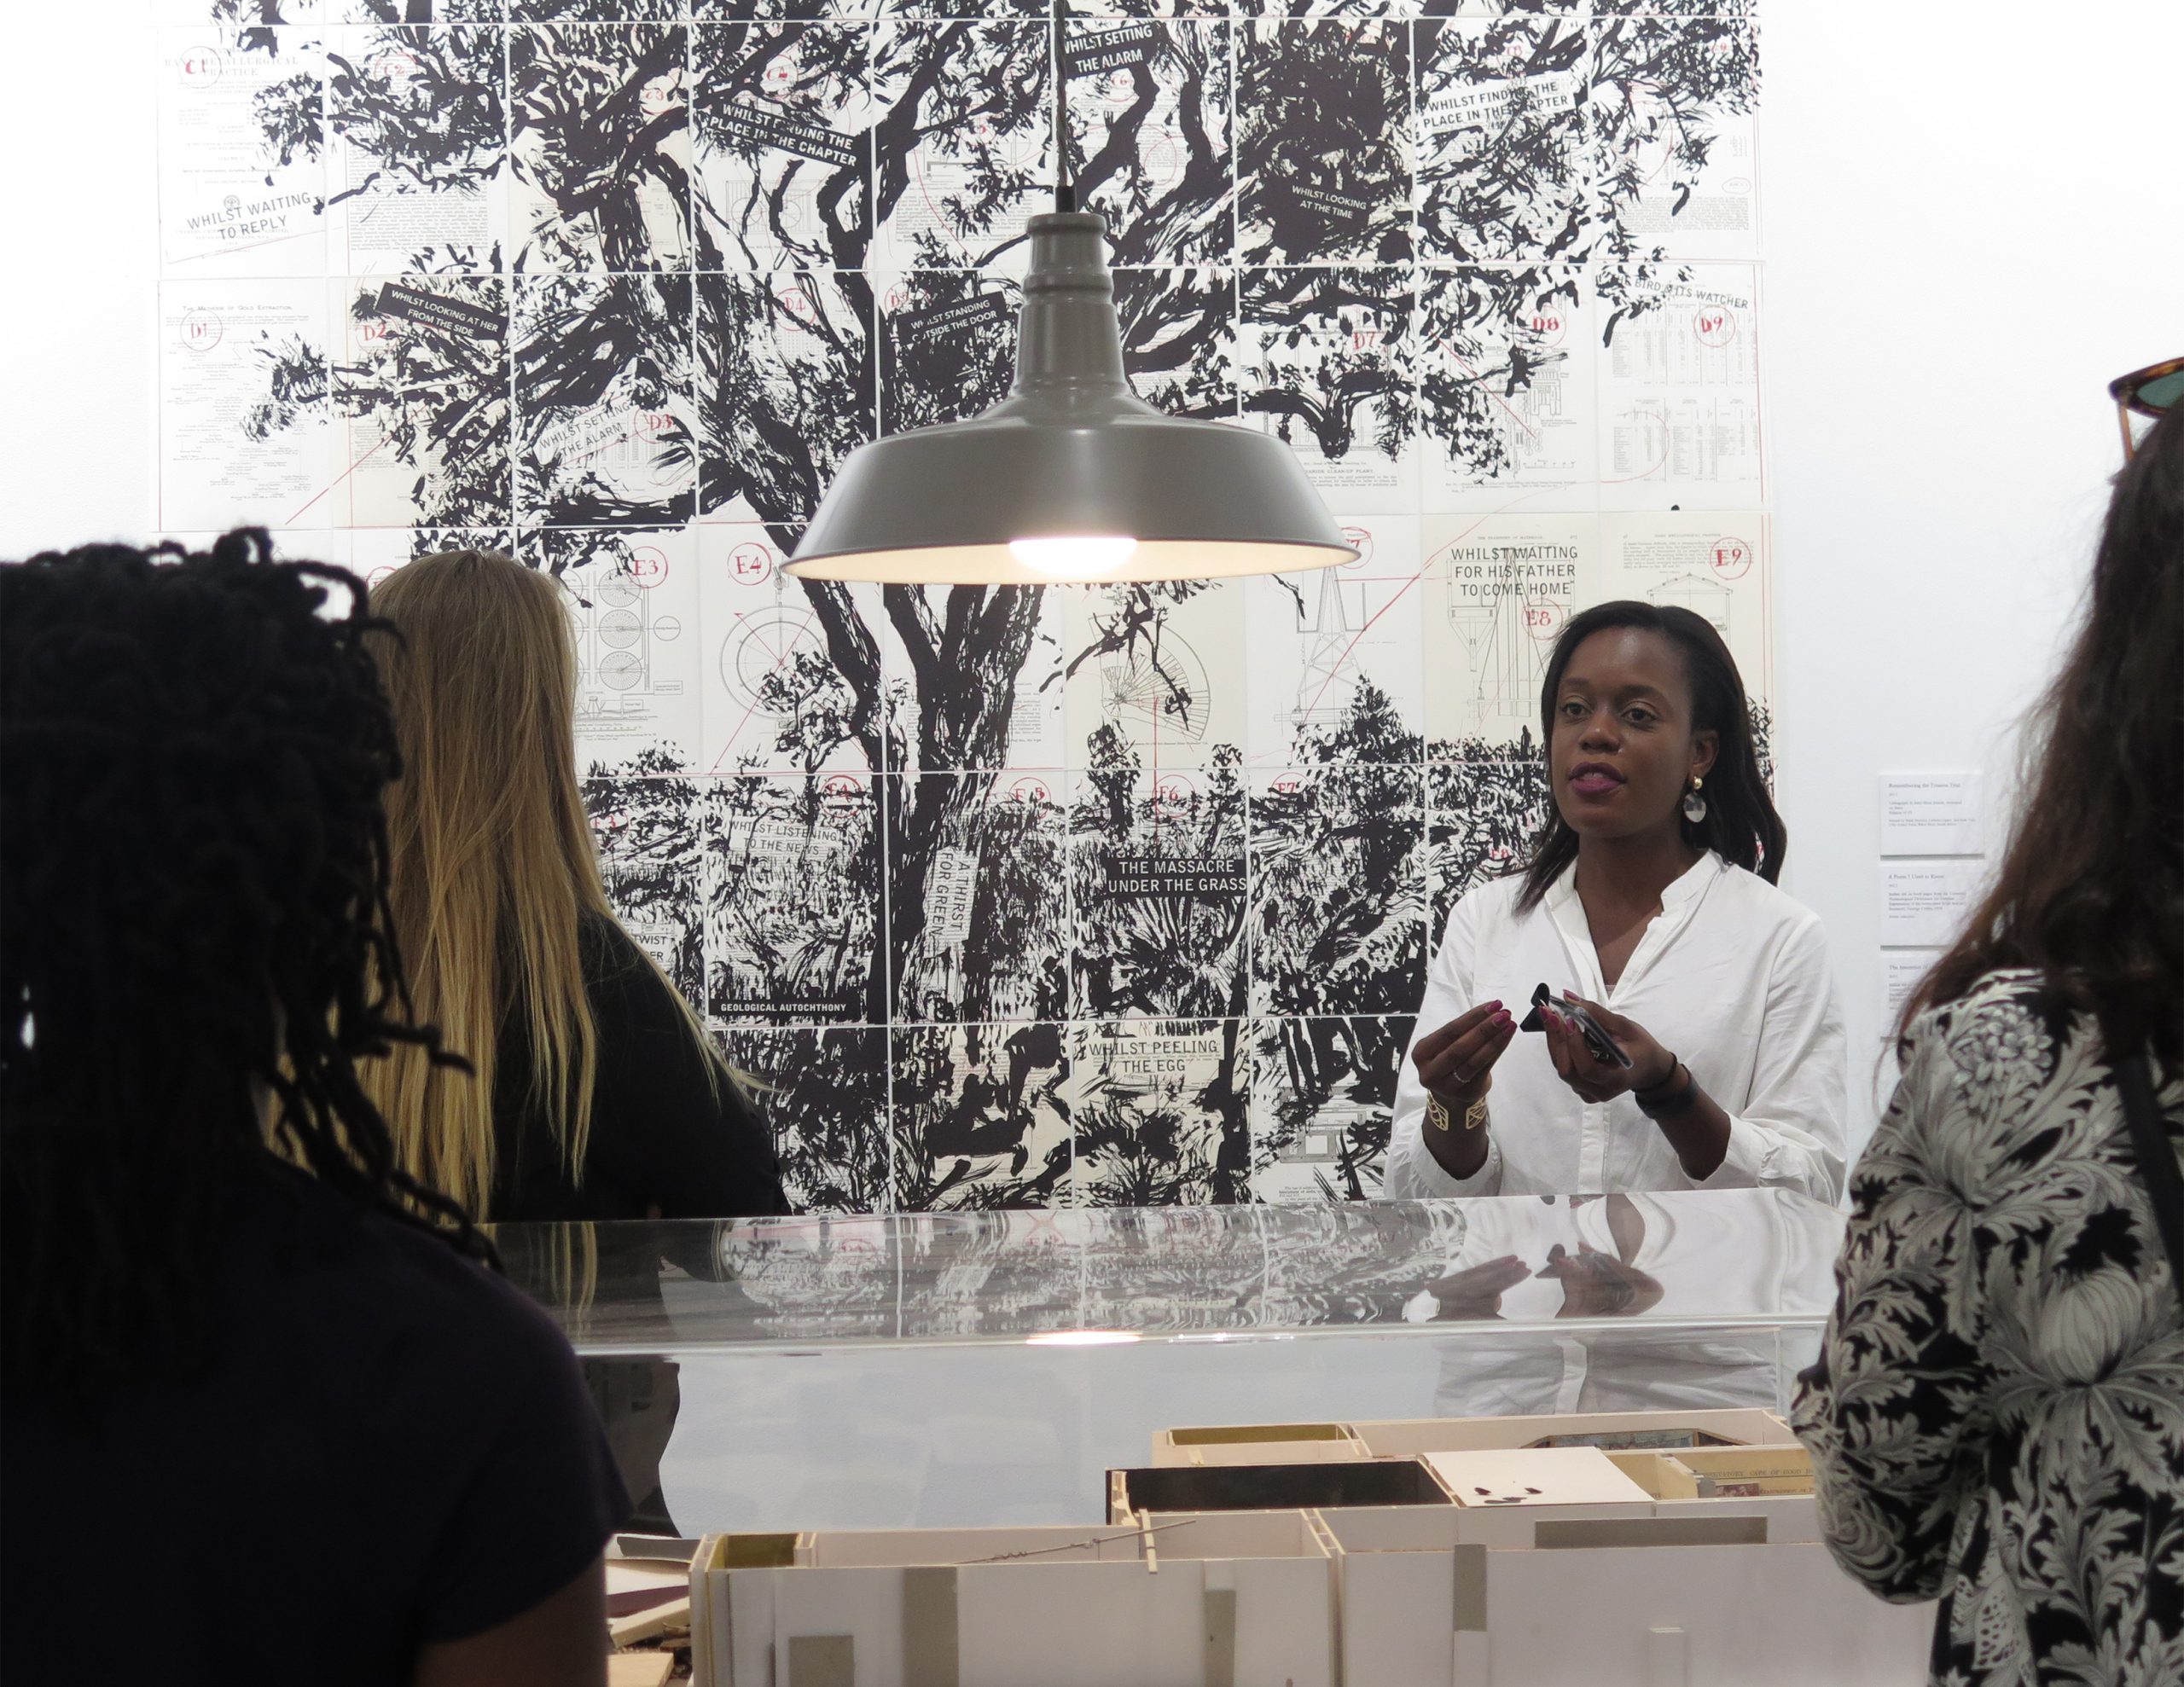 Tandazani Dhlakama (Curatorial Intensive Dakar '16), currently Assistant Curator, Zeitz MOCAA, speaking to the Curatorial Intensive participants in Cape Town, November 2019. Courtesy of ICI 